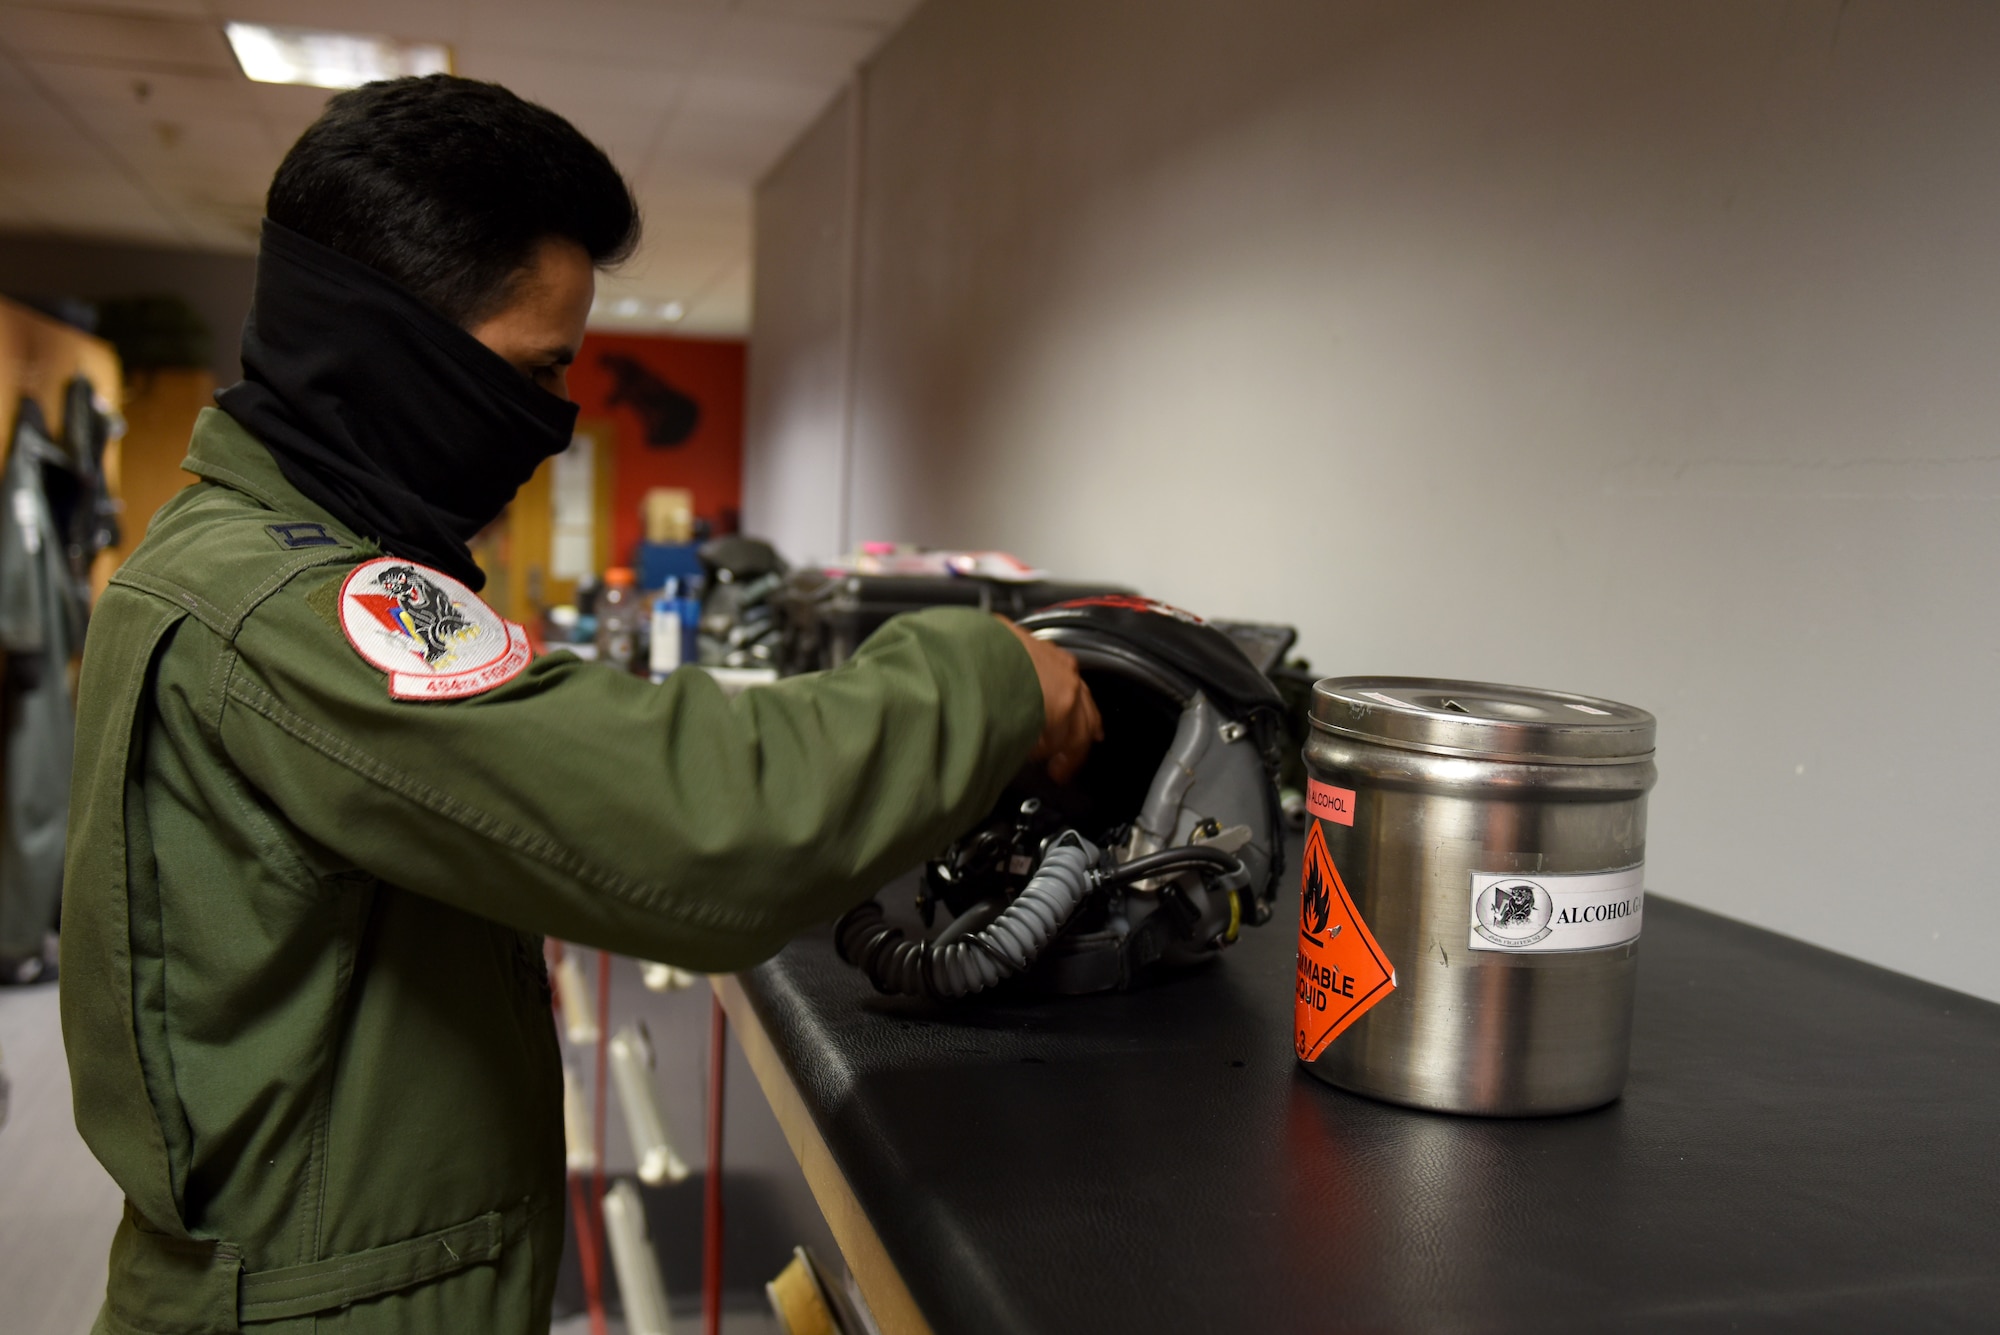 A pilot assigned to the 494th Fighter Squadron cleans his flight helmet at Royal Air Force Lakenheath, England, April 22, 2020. Liberty Wing aircrew must clean their gear after each flight before handing it over to an Aircrew Flight Equipment technician to further sanitize the equipment to help stop the spread of COVID-19. (U.S. Air Force photo by Airman 1st Class Rhonda Smith)